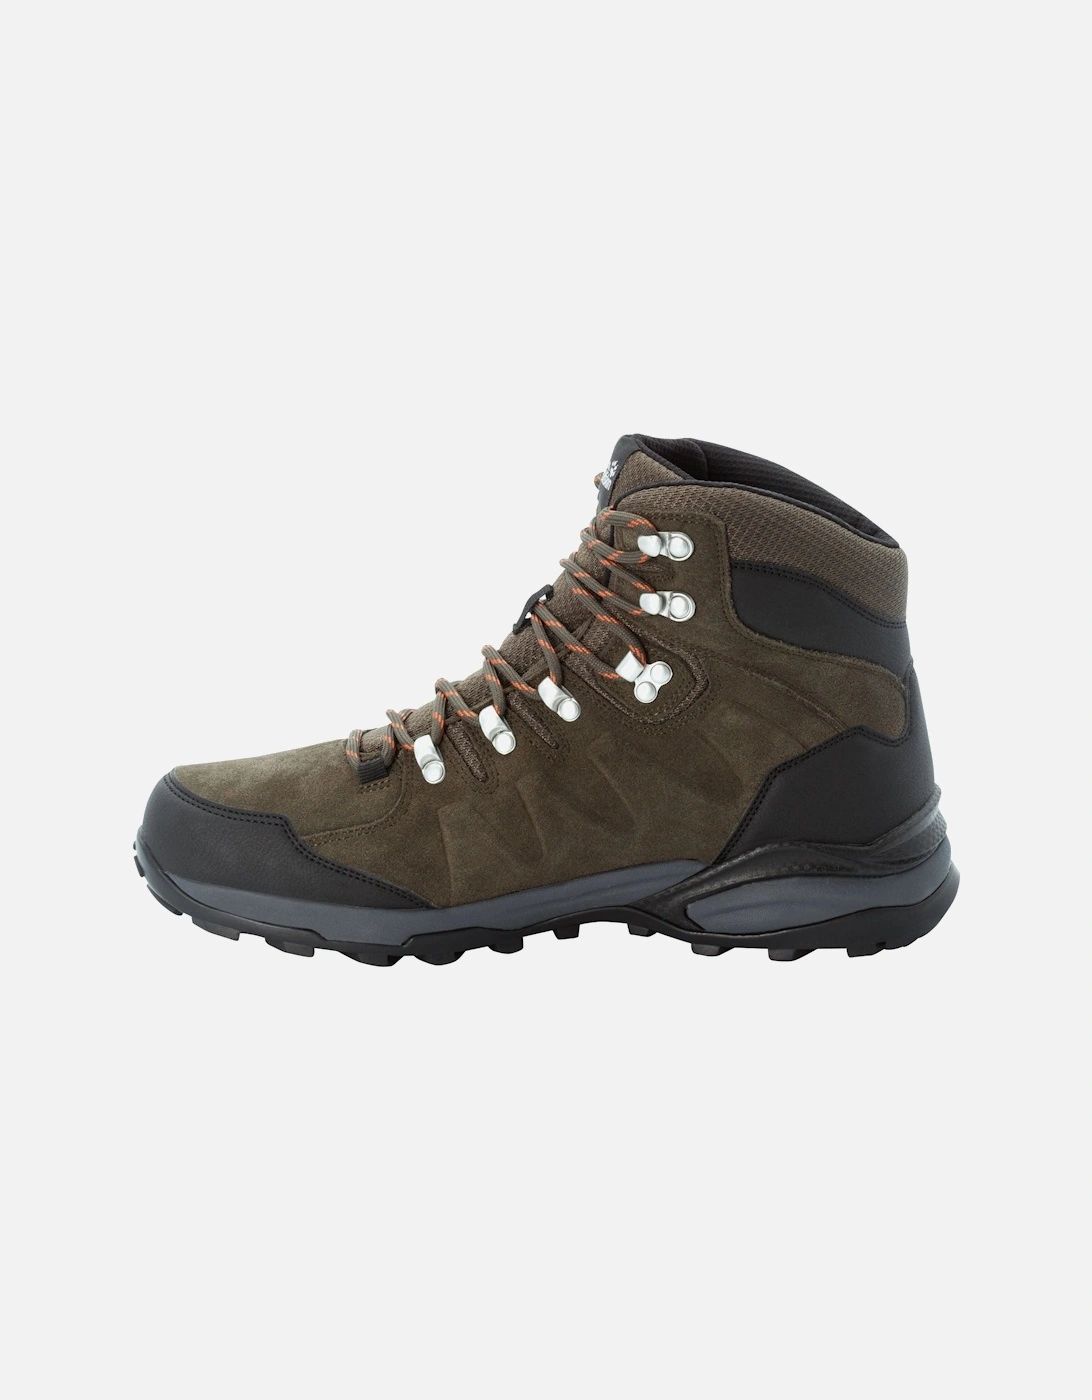 Mens Refugio Texapore Waterproof Leather Walking Boots